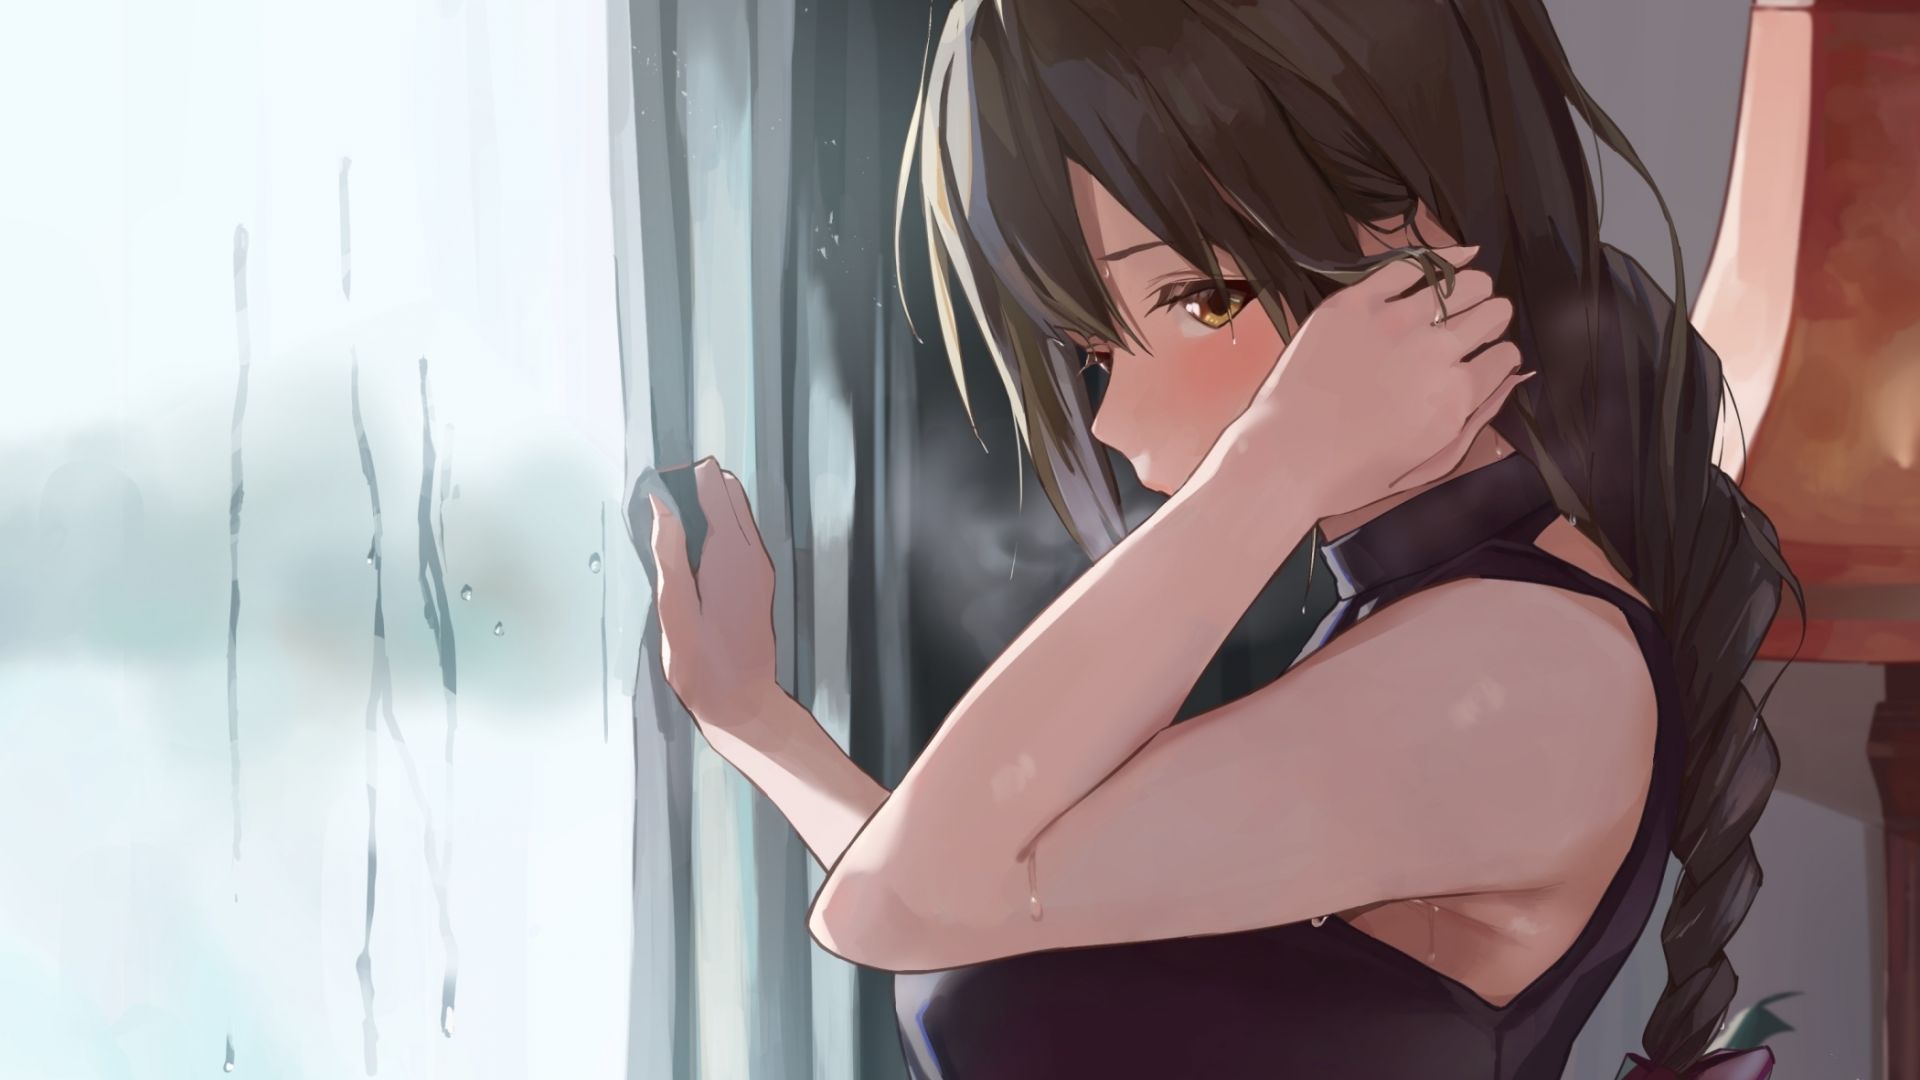 Wallpaper ID: 150037 / anime, anime girls, by the window free download